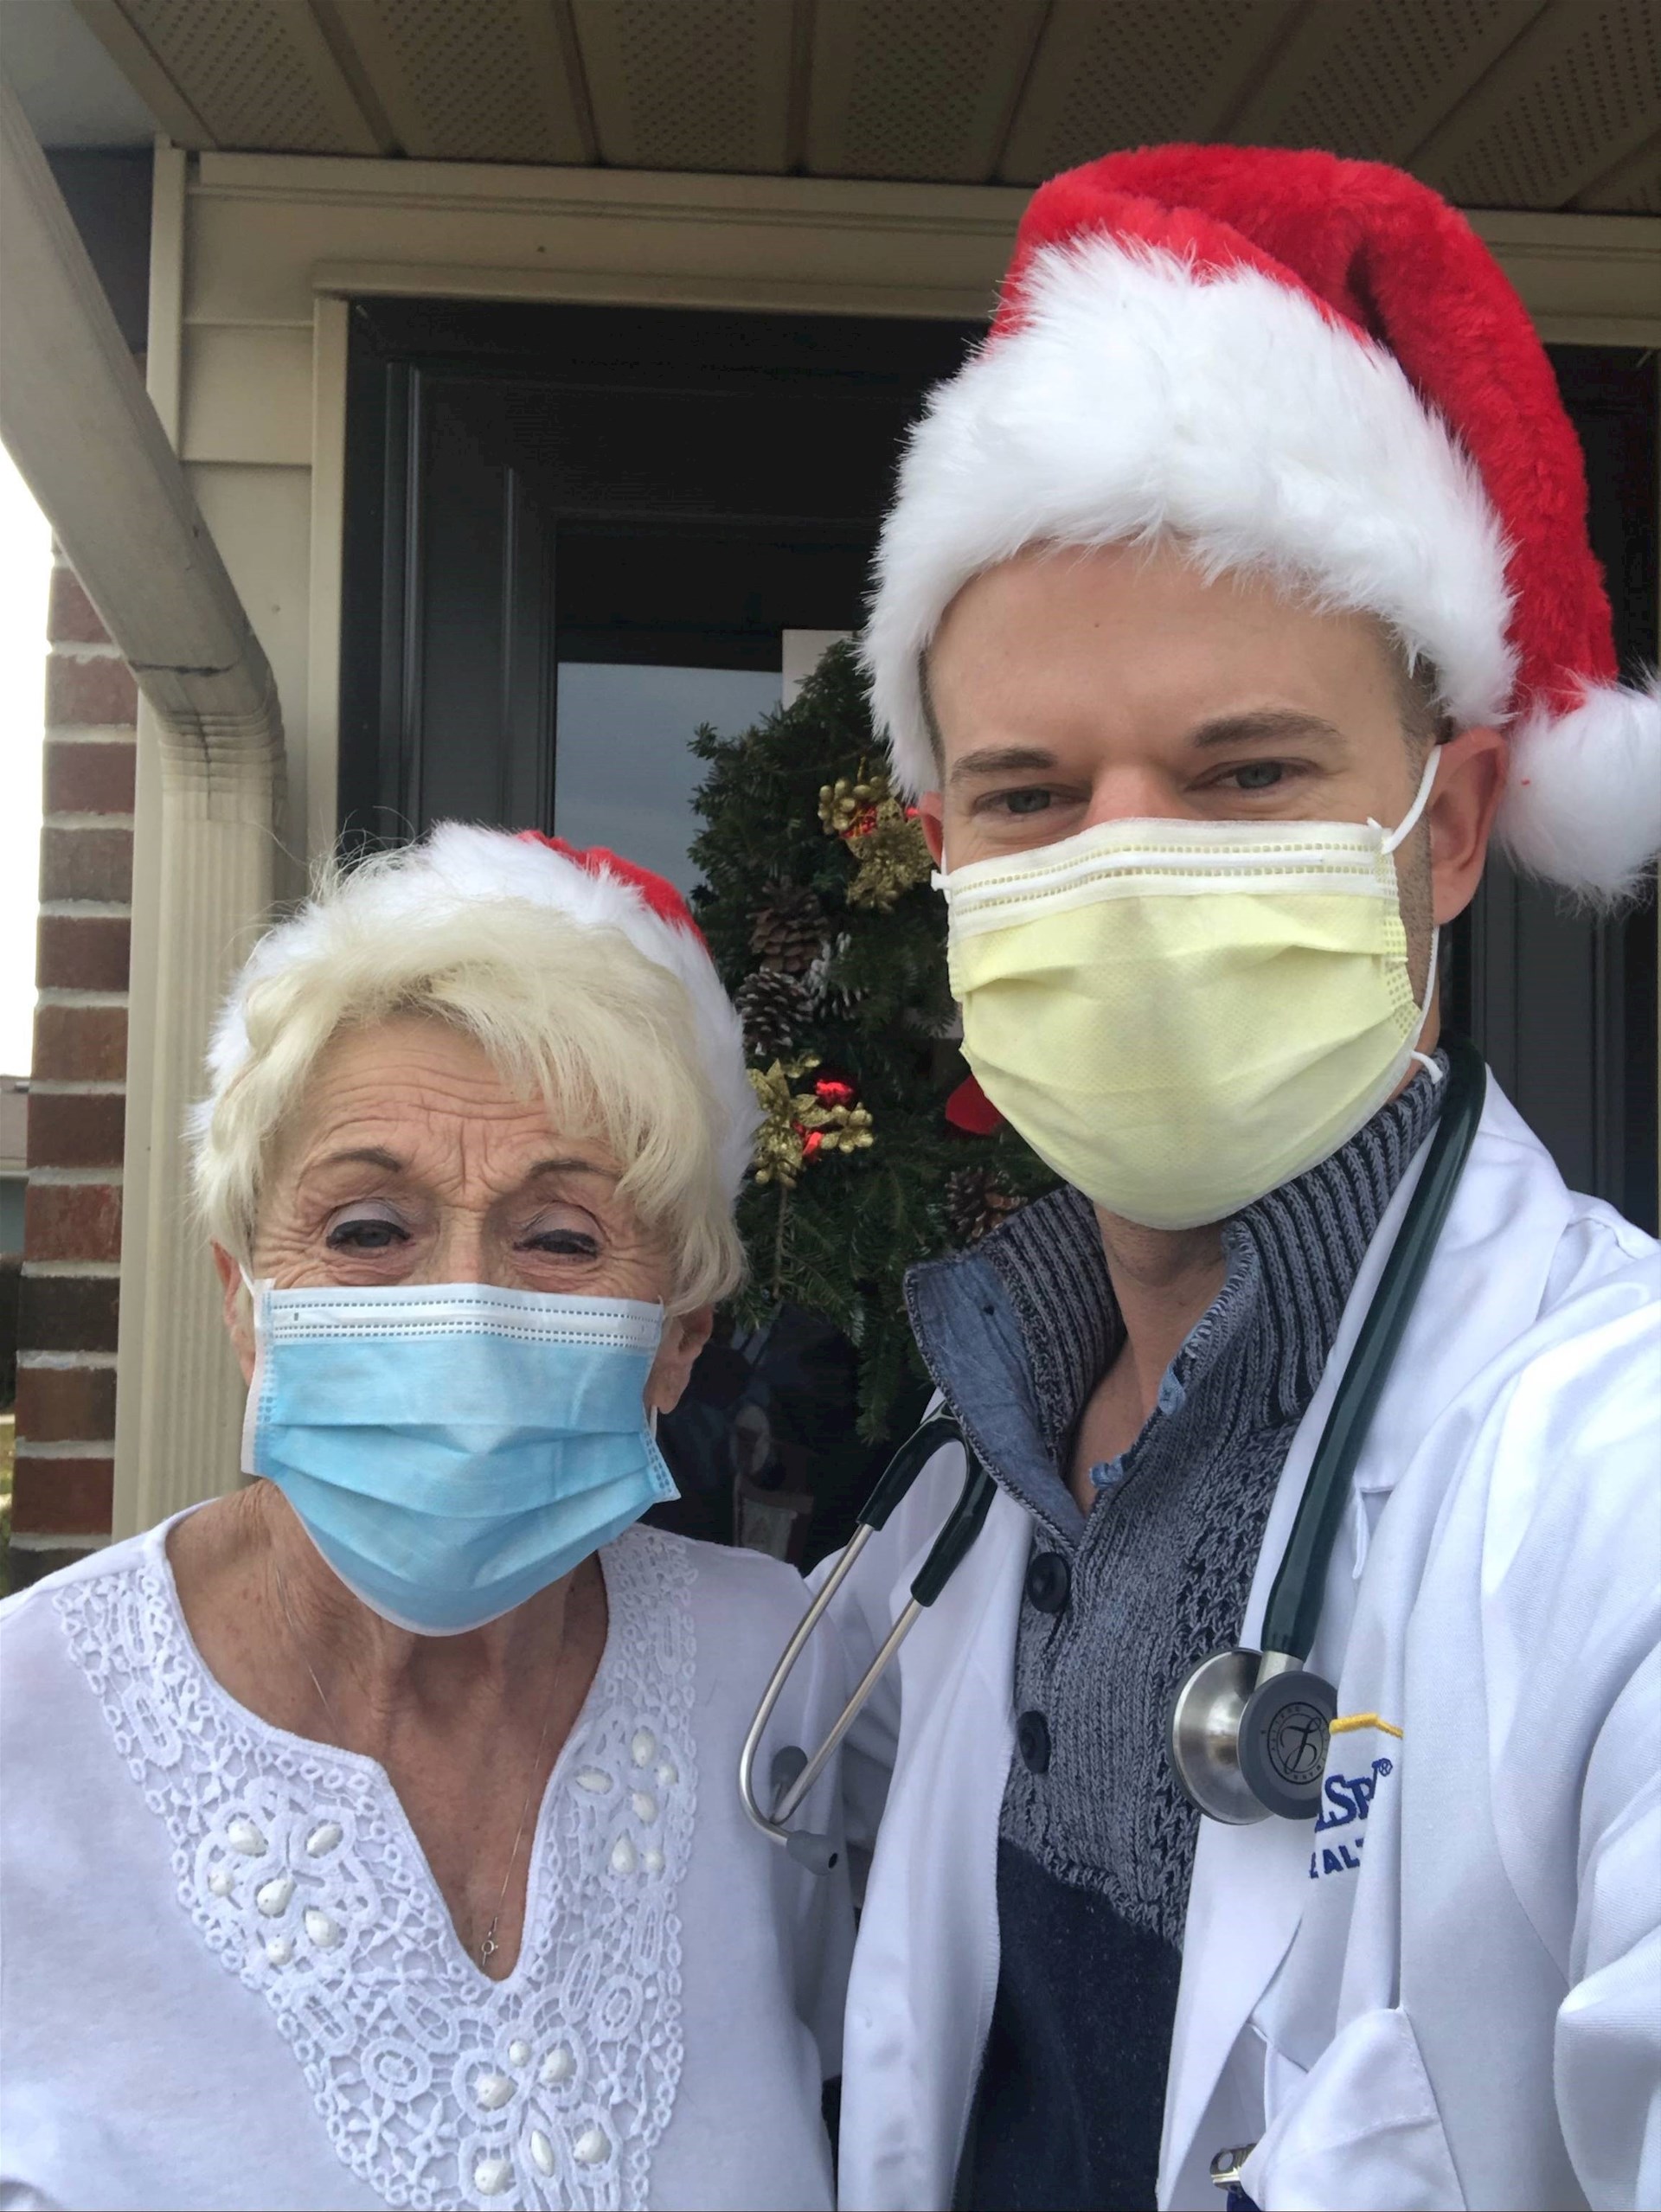 Dottie Rattigan was happy to get care for WellSpan Hospital at Home during the holidays. She is shown here with the program's director. Adam Updegraff.